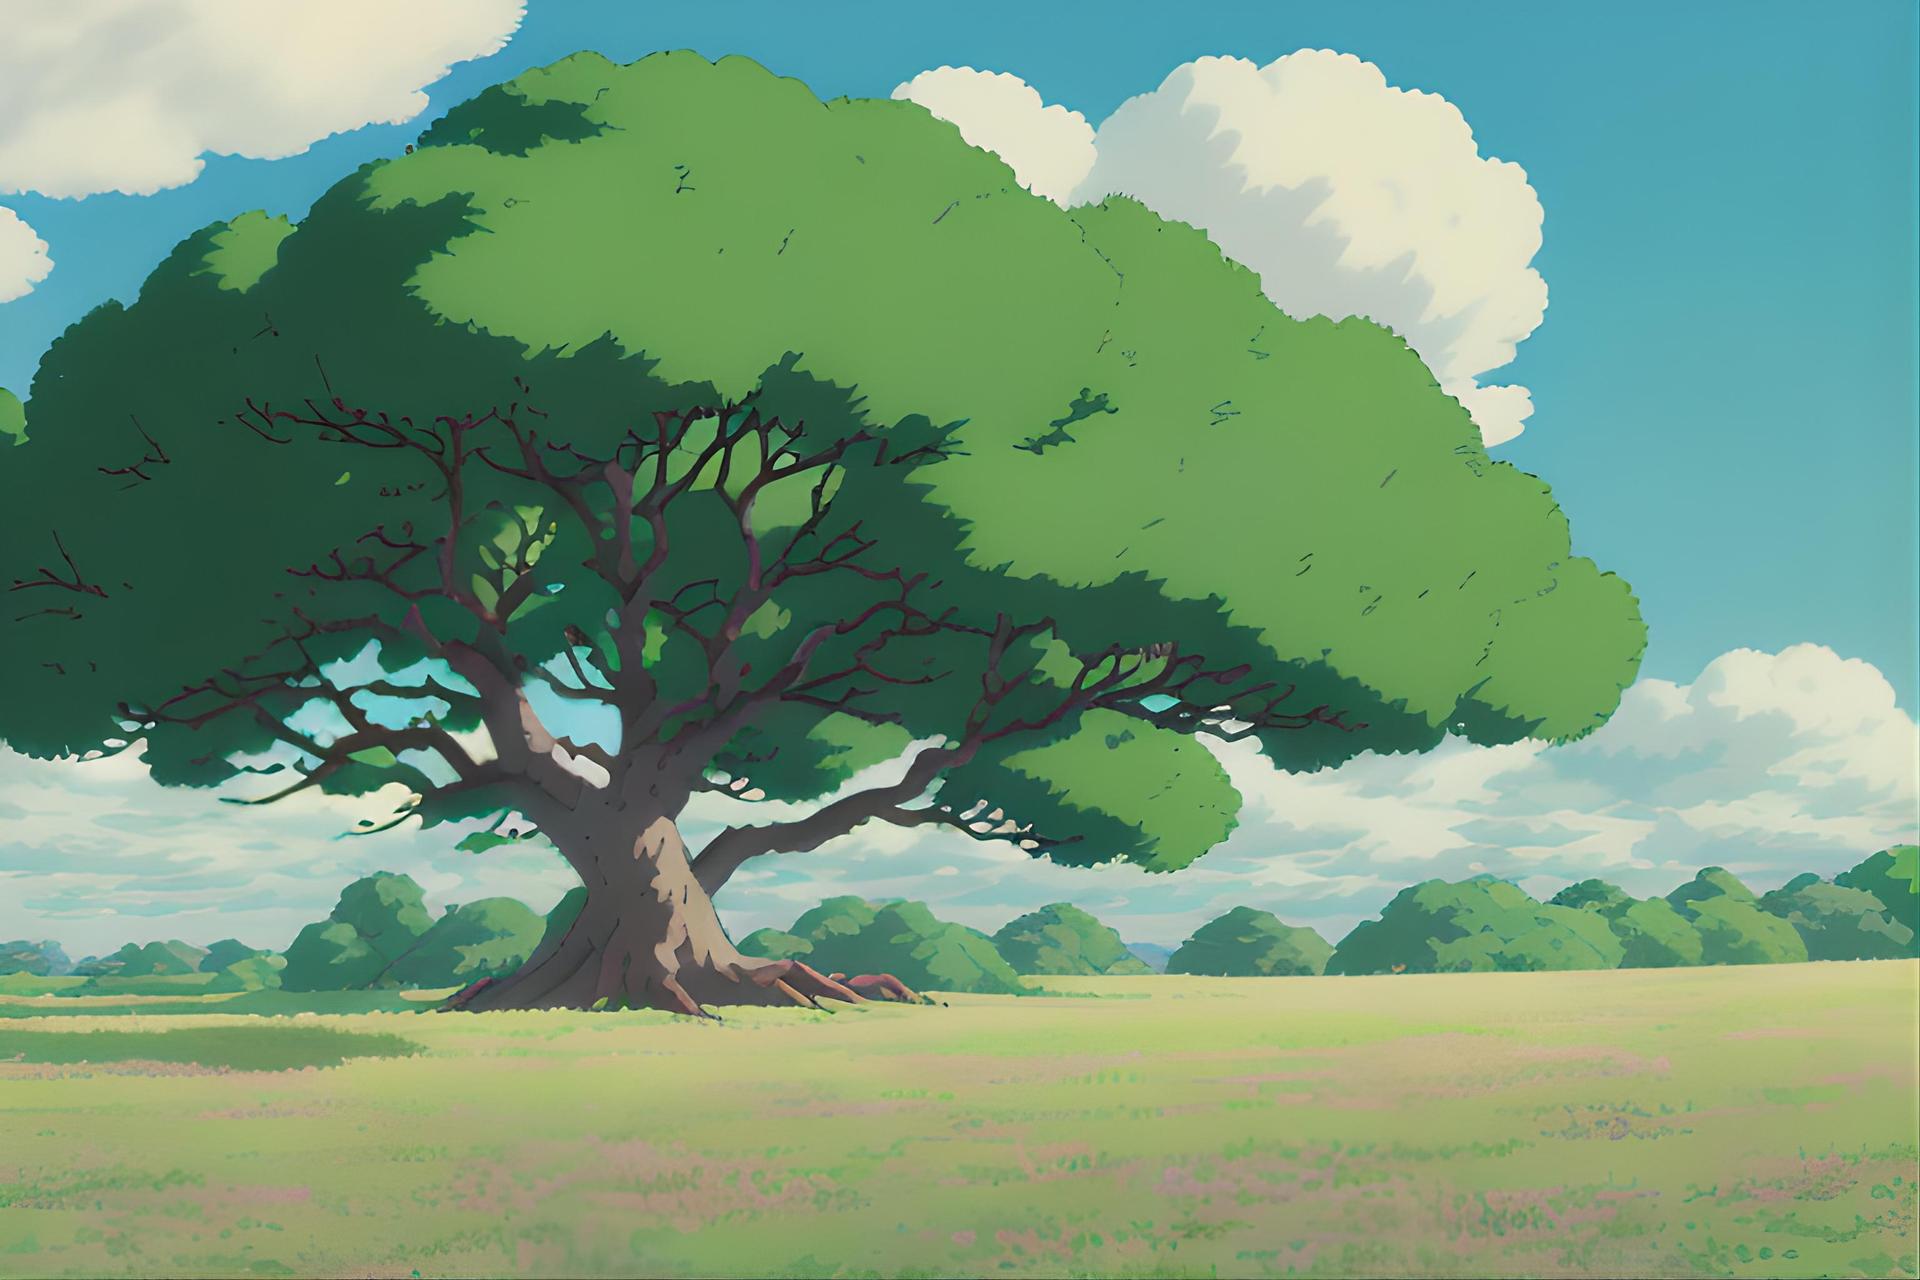 ai generated from text Studio Ghibli image depicting digital art of a majestic, solitary tree with a thick trunk and expansive canopy of green leaves, standing in the center of a tranquil field with scattered flowers, under a sky dotted with fluffy white clouds.